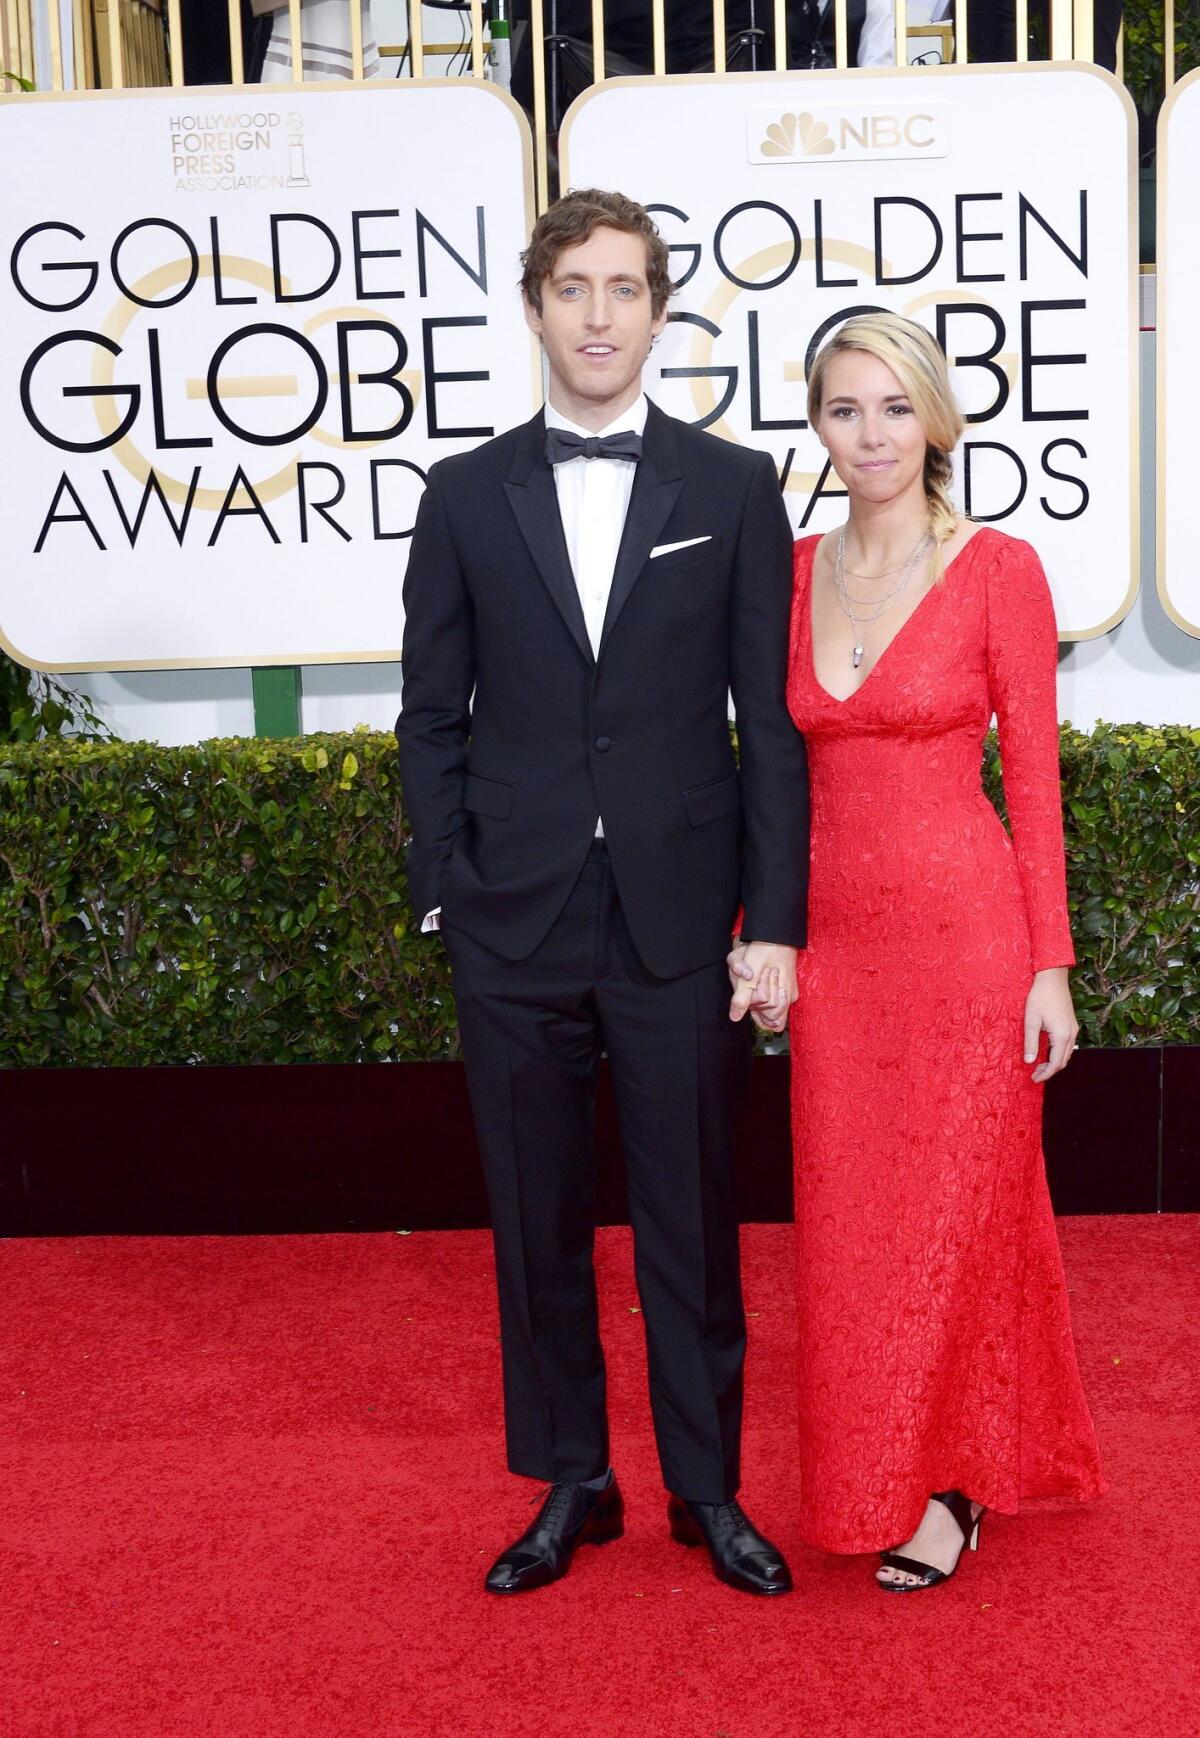 epa04556087 Thomas Middleditch (L) and guest arrive for the 72nd Annual Golden Globe Awards at the Beverly Hilton Hotel, in Beverly Hills, California, USA, 11 January 2015. EPA/PAUL BUCK ** Usable by LA, CT and MoD ONLY **